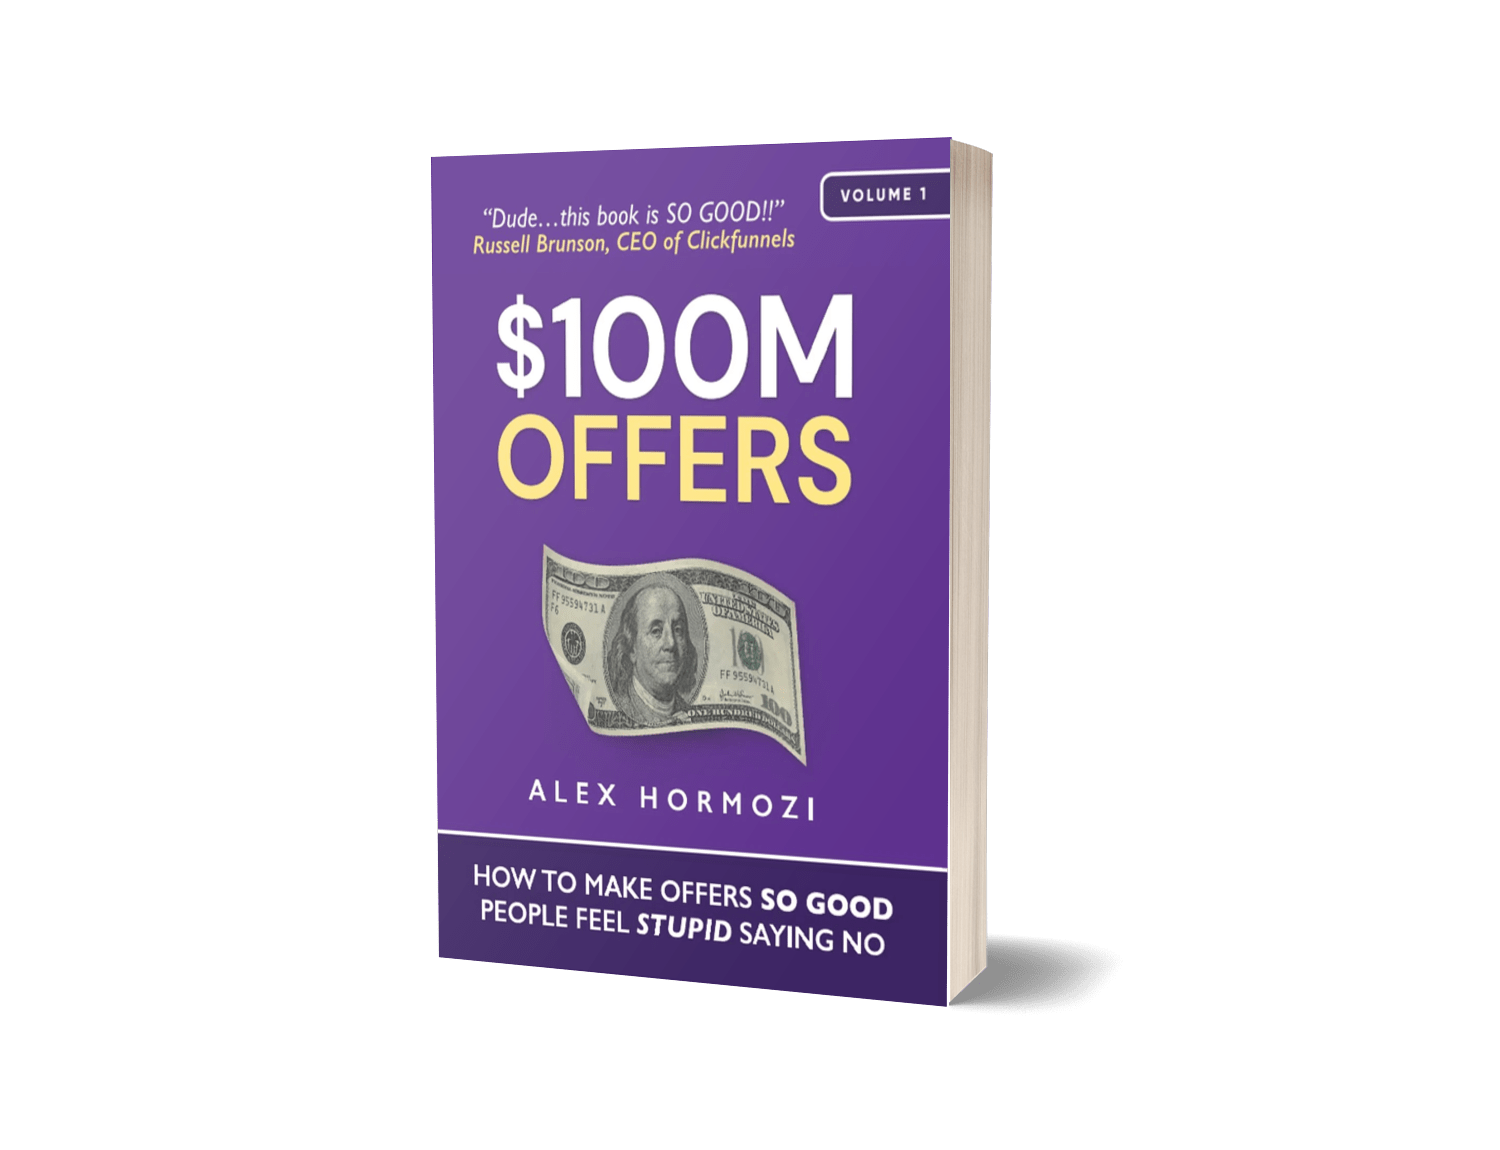 $100M Offers: How to Make Offers So Good People Feel Stupid Saying No by Alex Hormozi